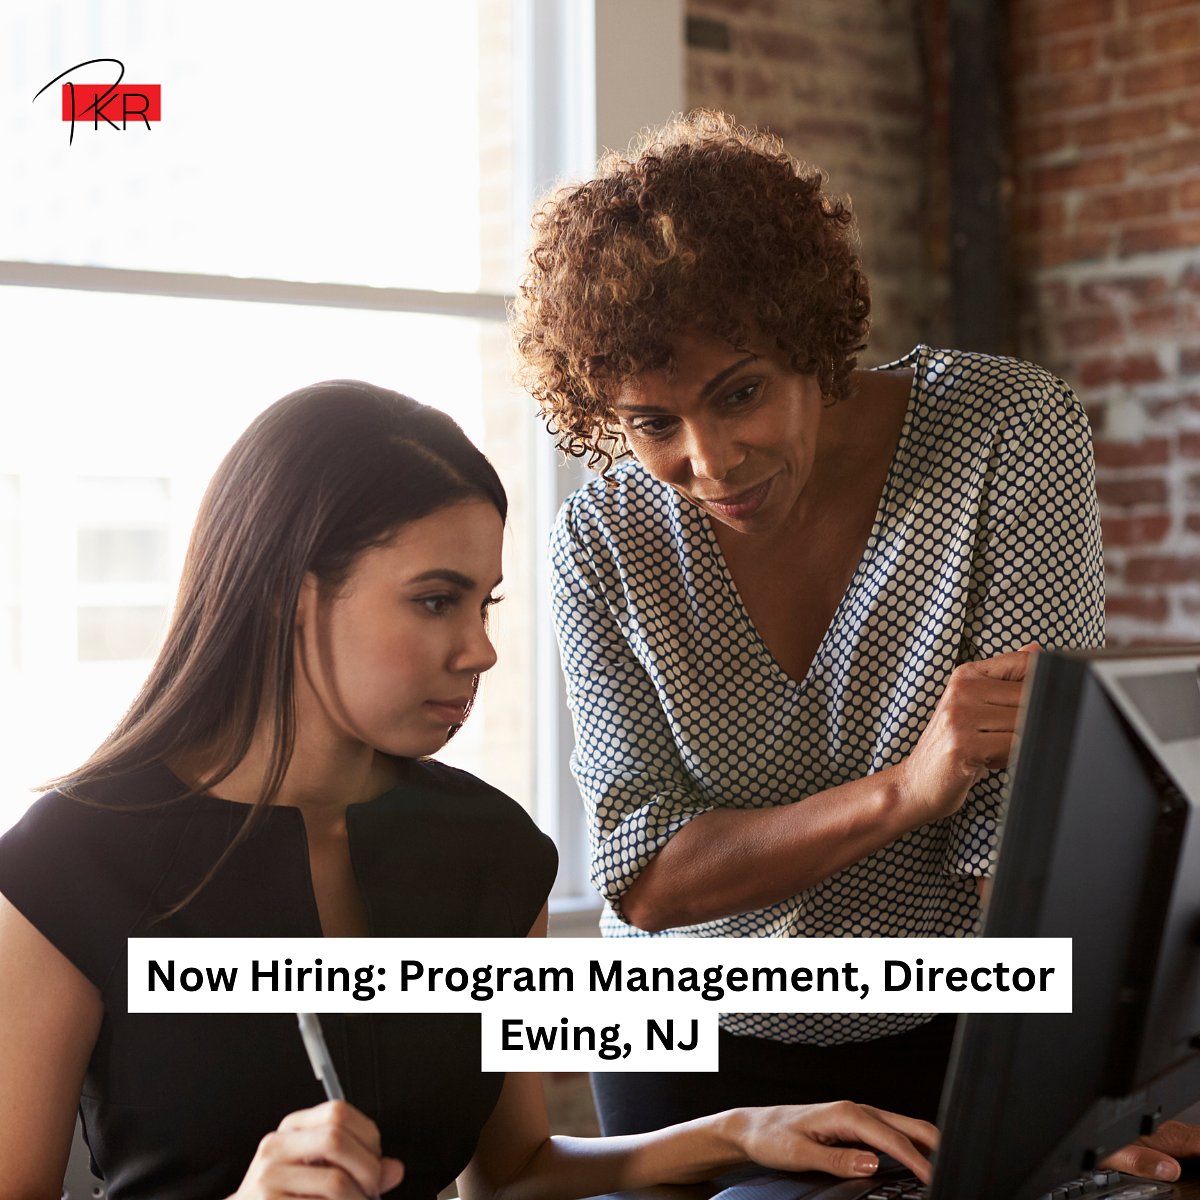 No one understands company culture more than our client. We are scouting for the best Program Management Director in town. Is it you? If so, please apply today! 

#Employment #Jobs #Recruitment #Hiring #directorjobs